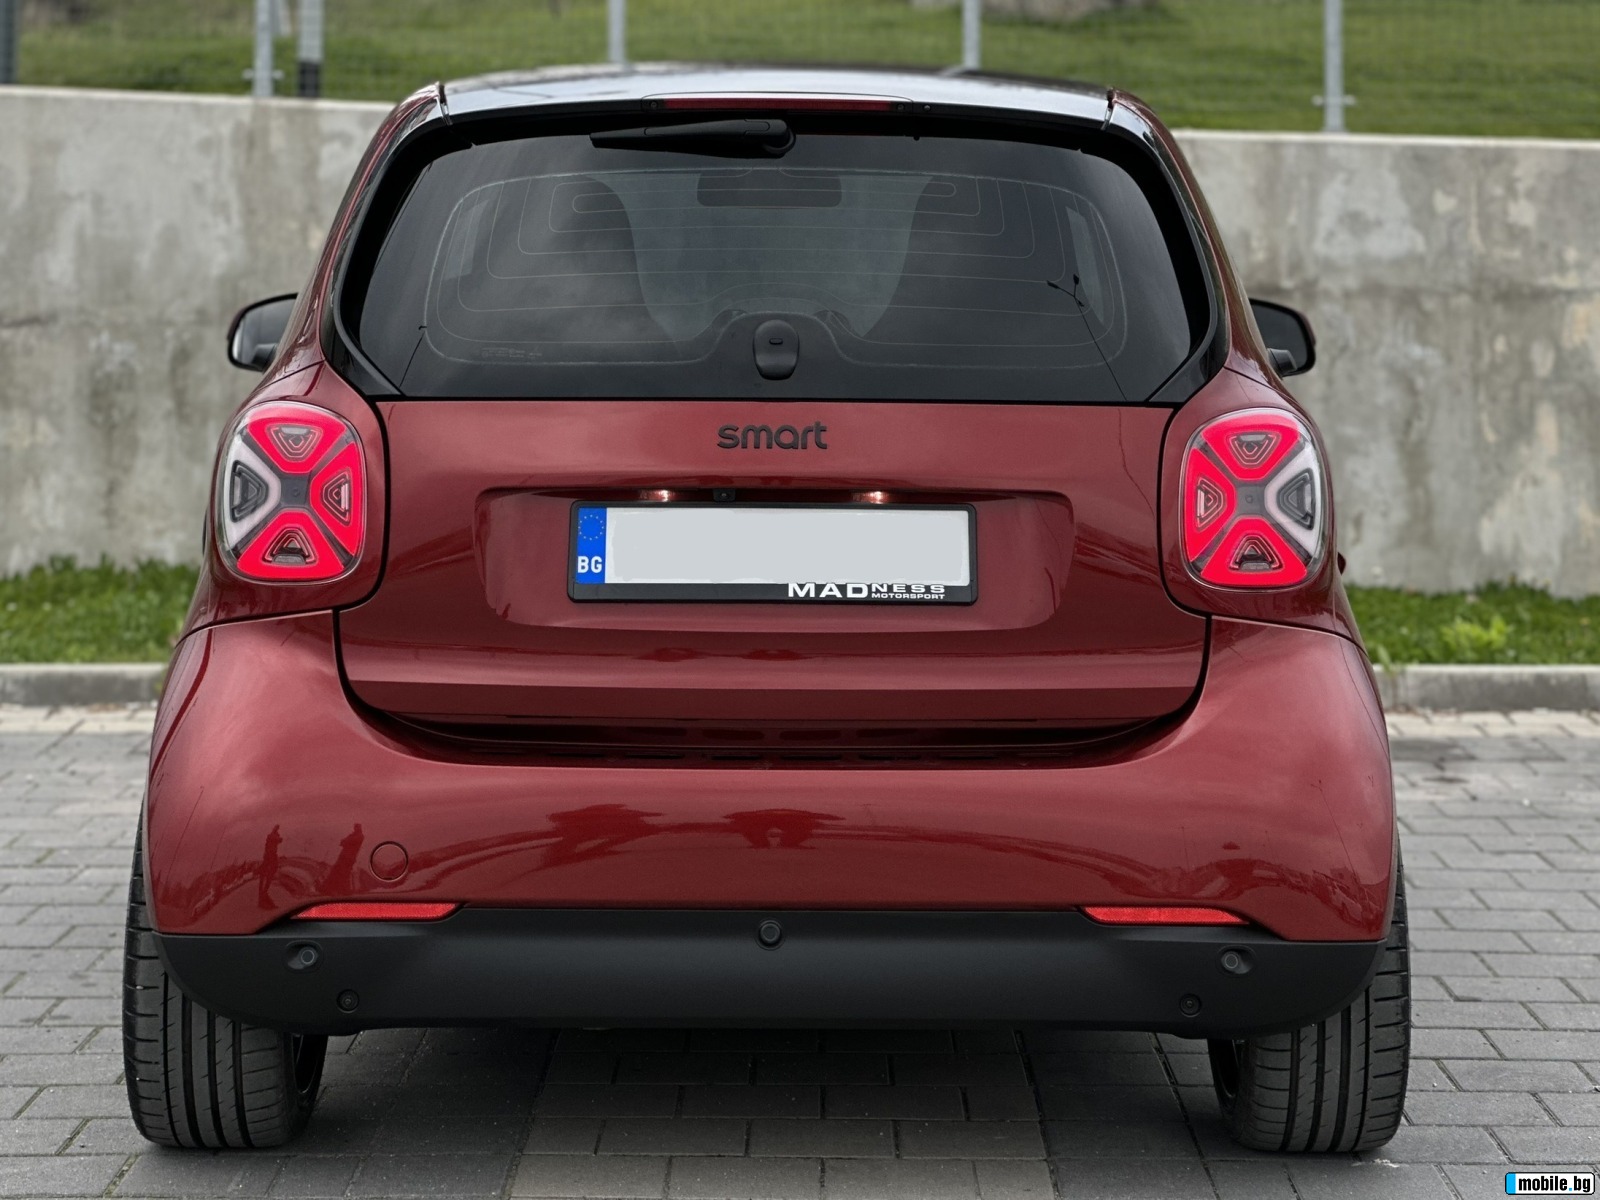 Smart Fortwo EQ Exclusive   2300   LED    | Mobile.bg   11